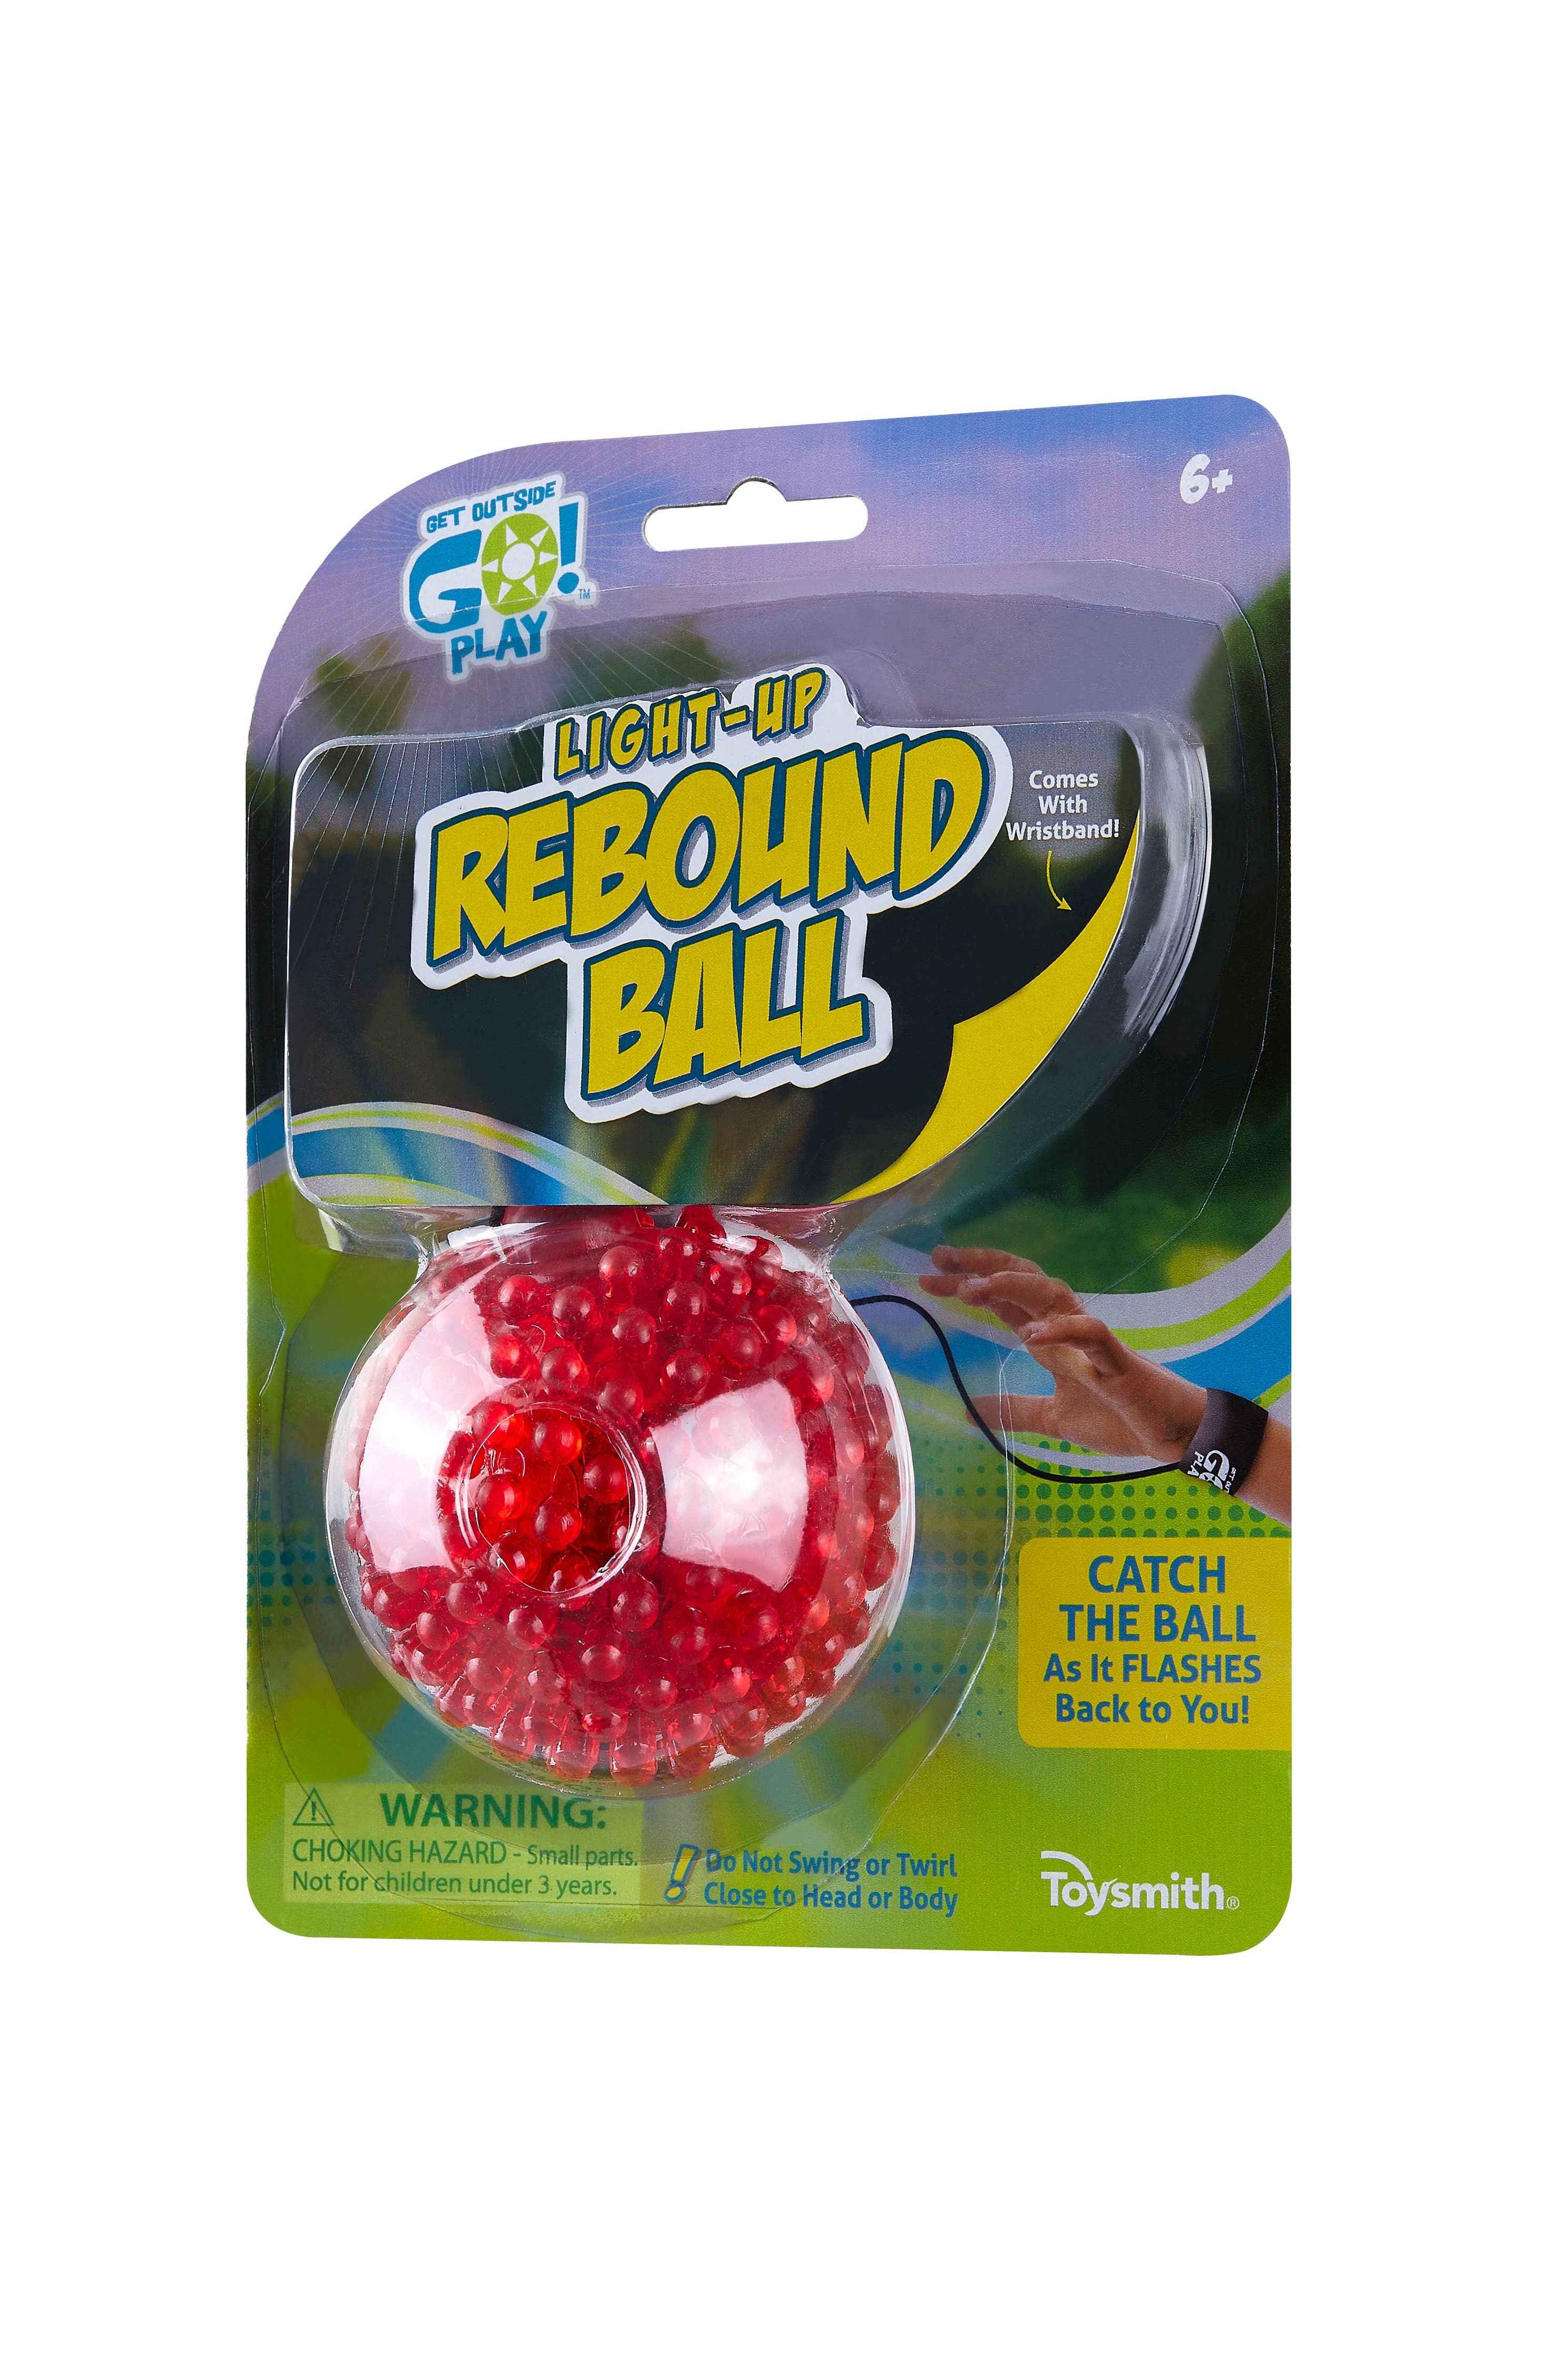 Toysmith - Get Outside GO!™ Play Light-Up Rebound Ball